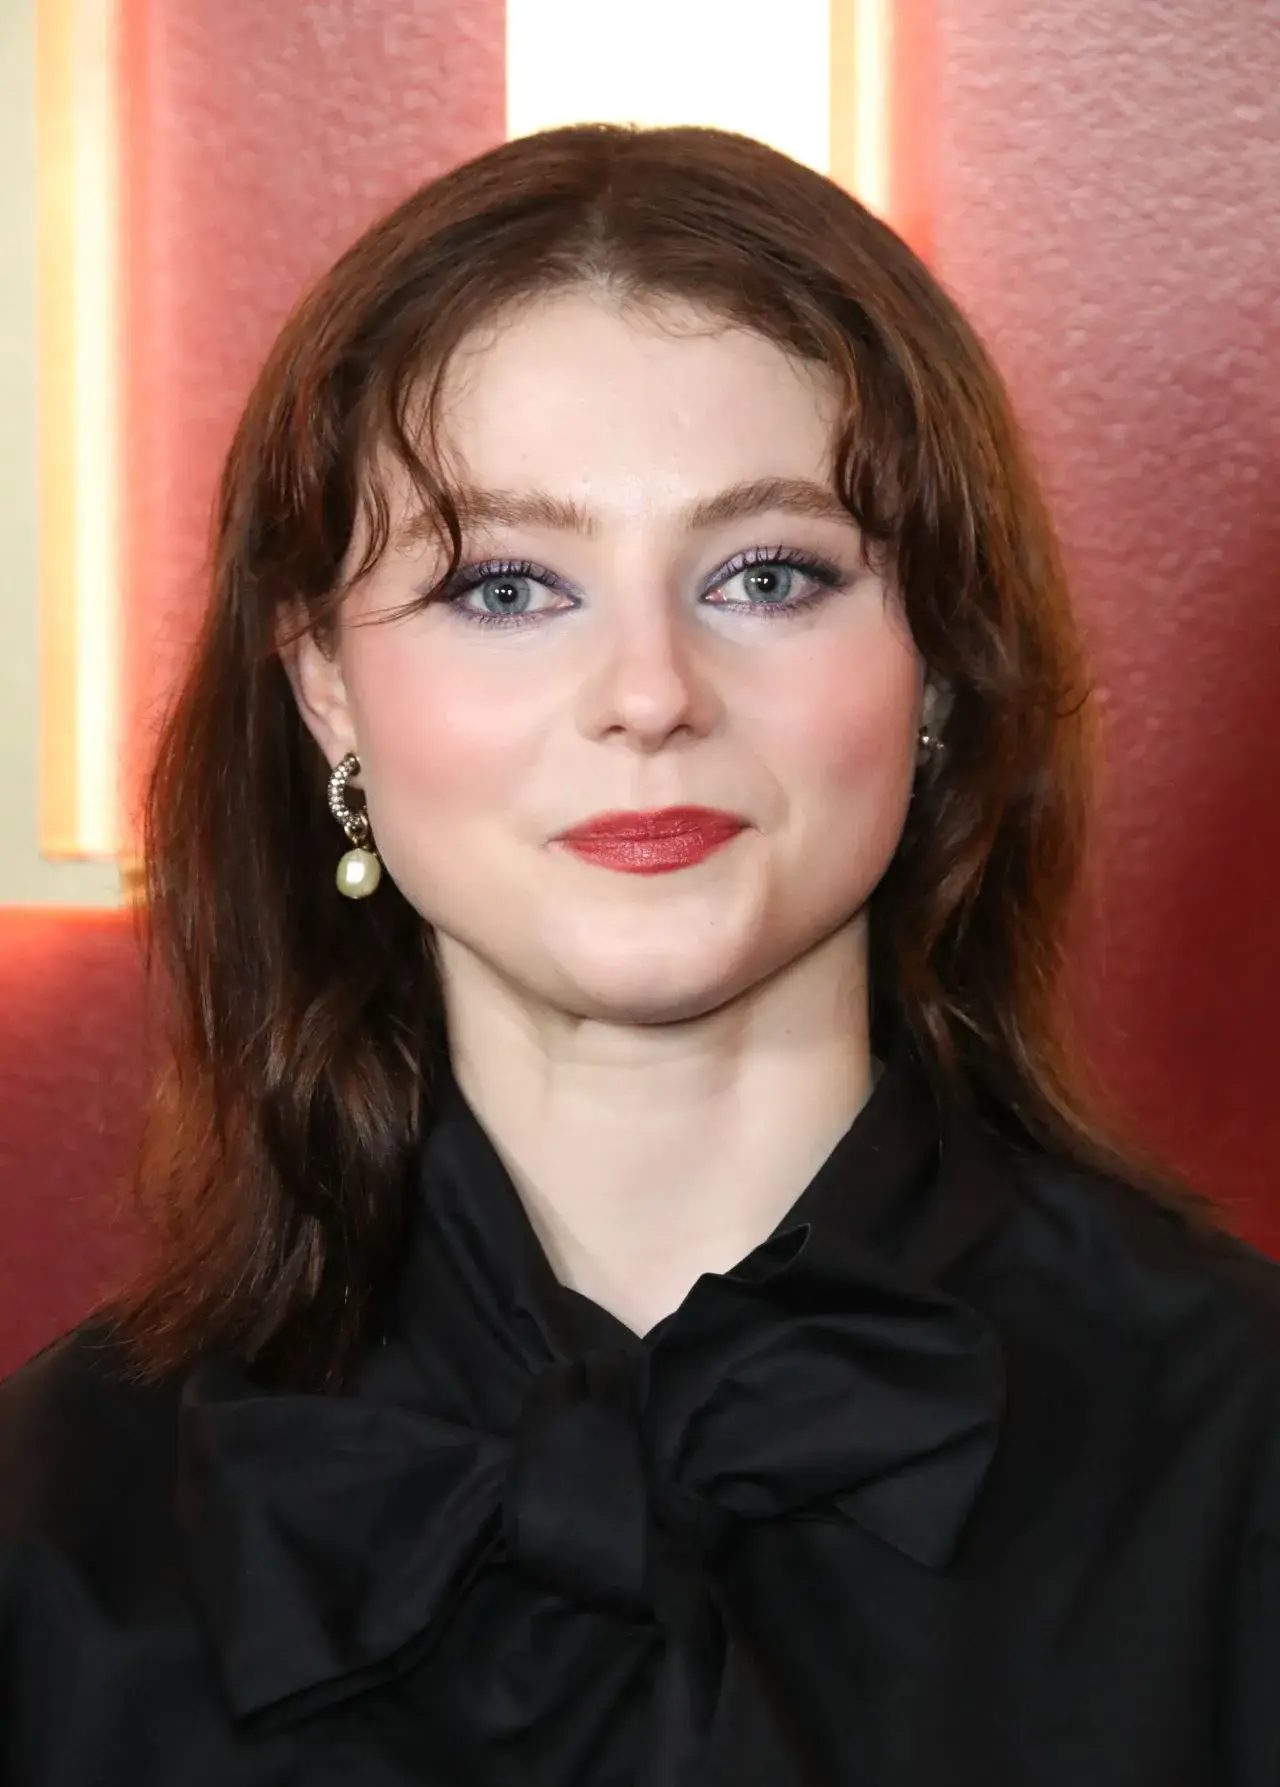 THOMASIN MCKENZIE AT VANITY FAIR AND INSTAGRAM VANITIES A NIGHT FOR YOUNG HOLLYWOOD